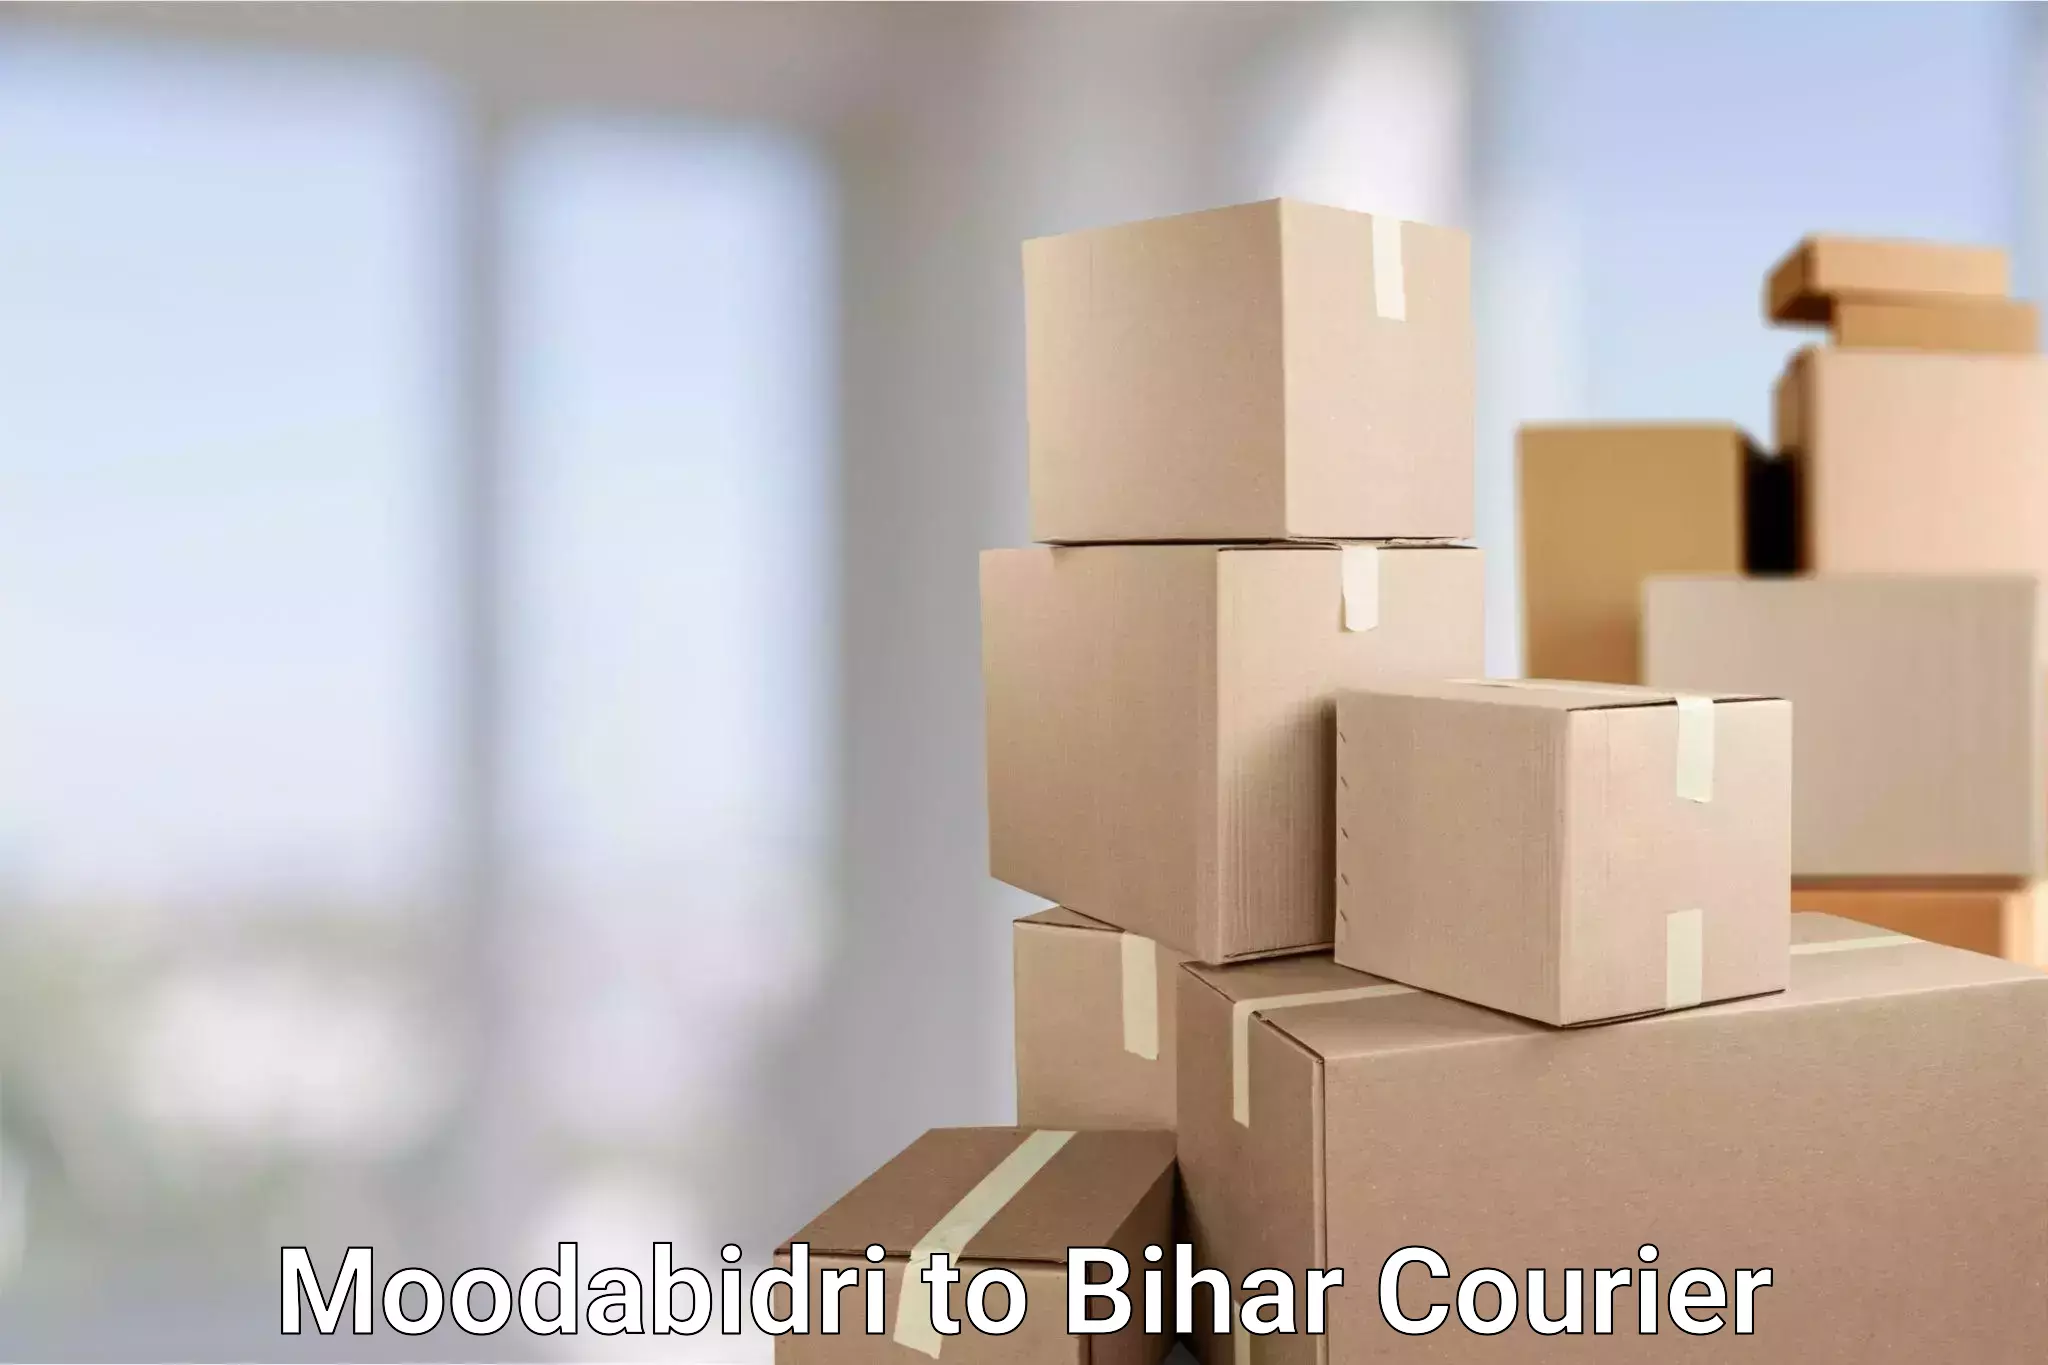 Secure package delivery in Moodabidri to Madhepura